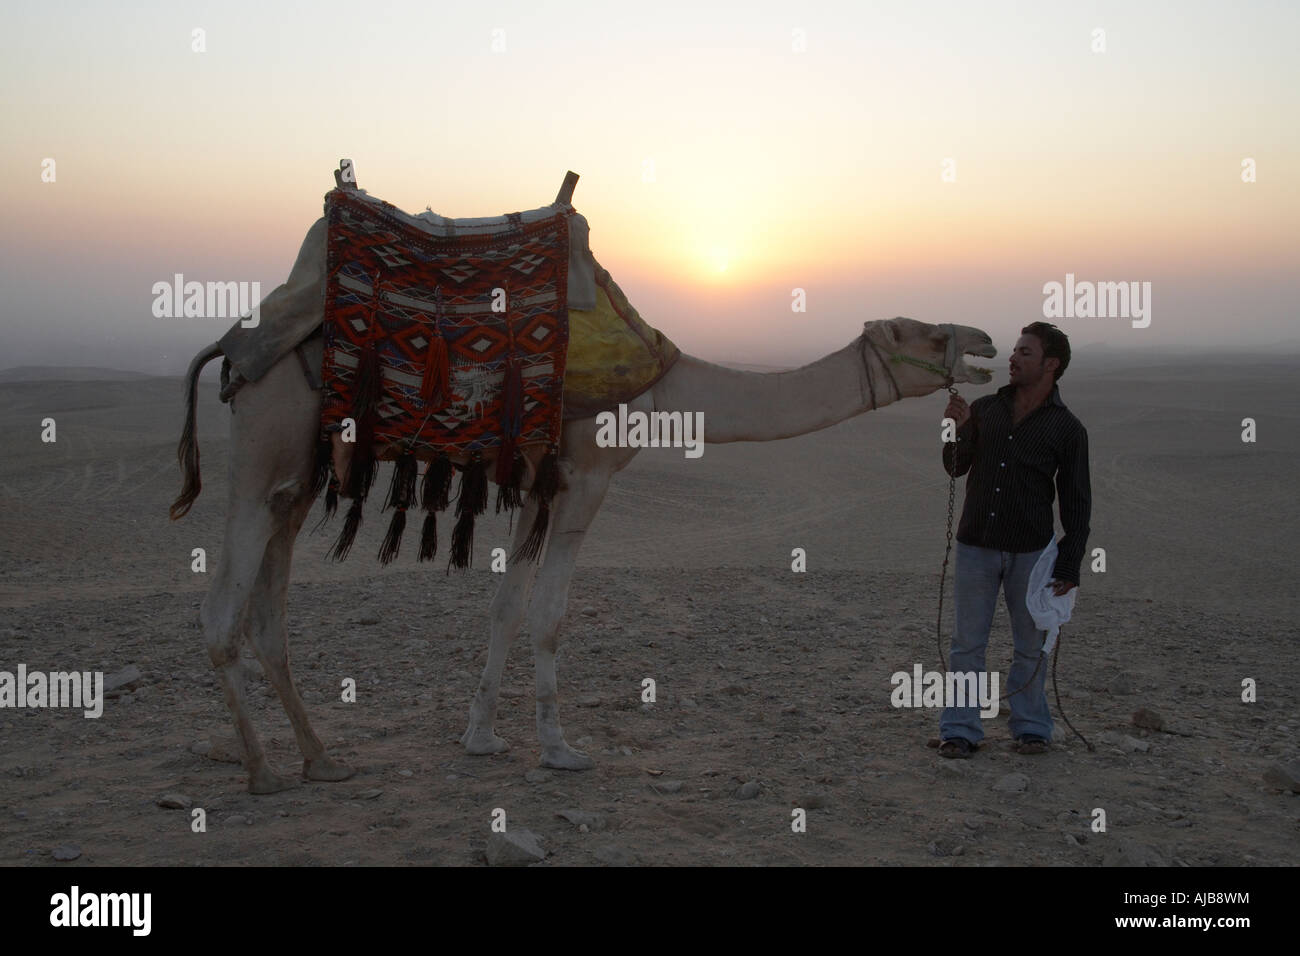 Guide talking to a camel in the stony desert in early morning sunrise Giza Cairo Egypt Africa Amusing funny comic humourous ani Stock Photo